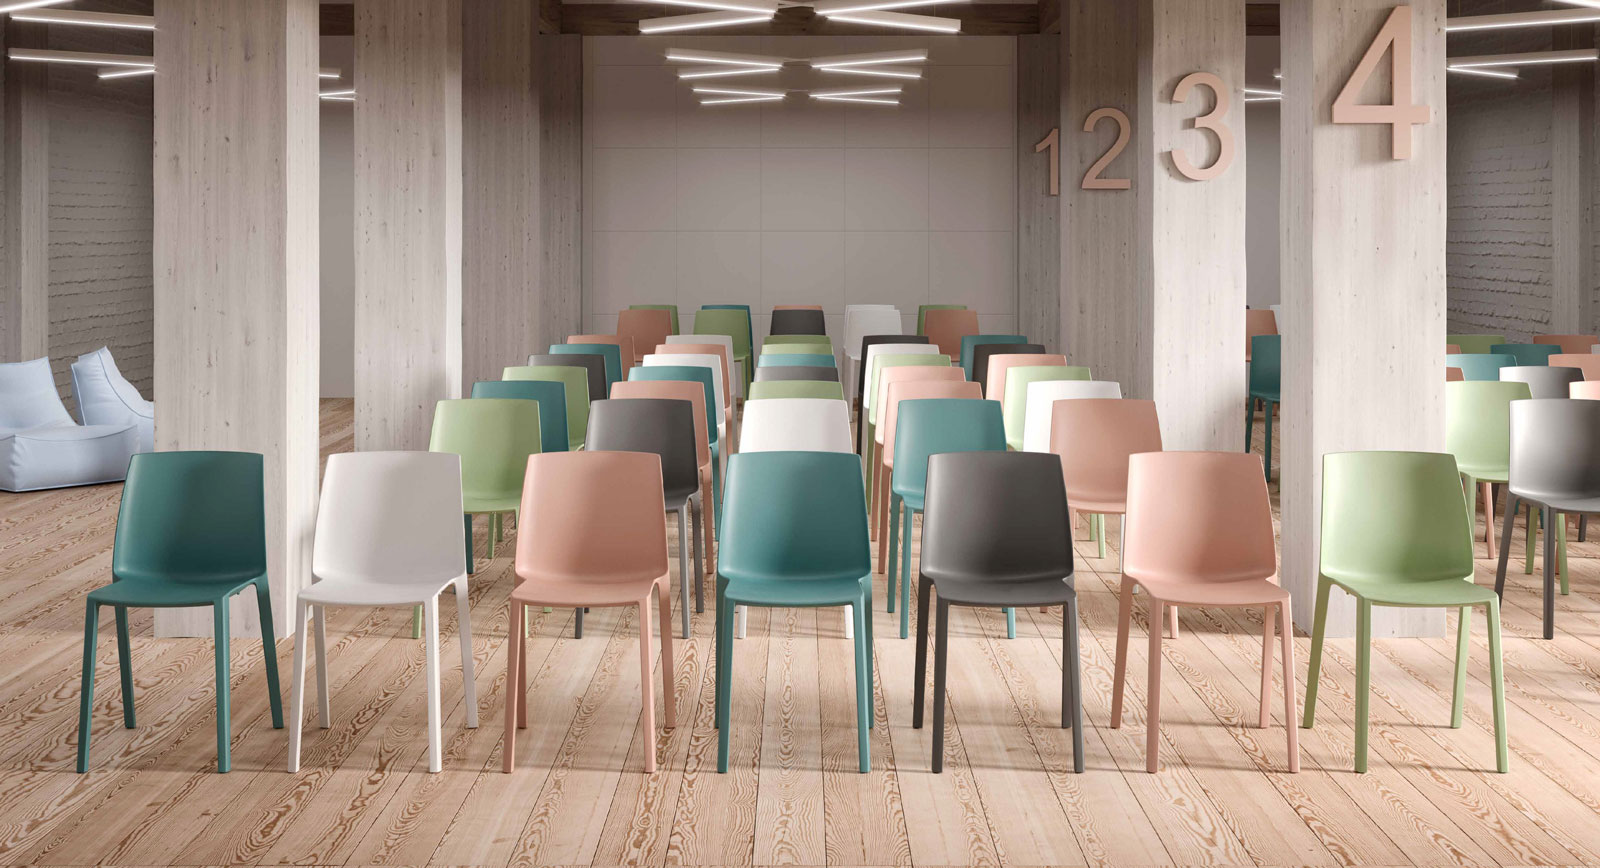 Subtle colour options make an impact for conference or training rooms